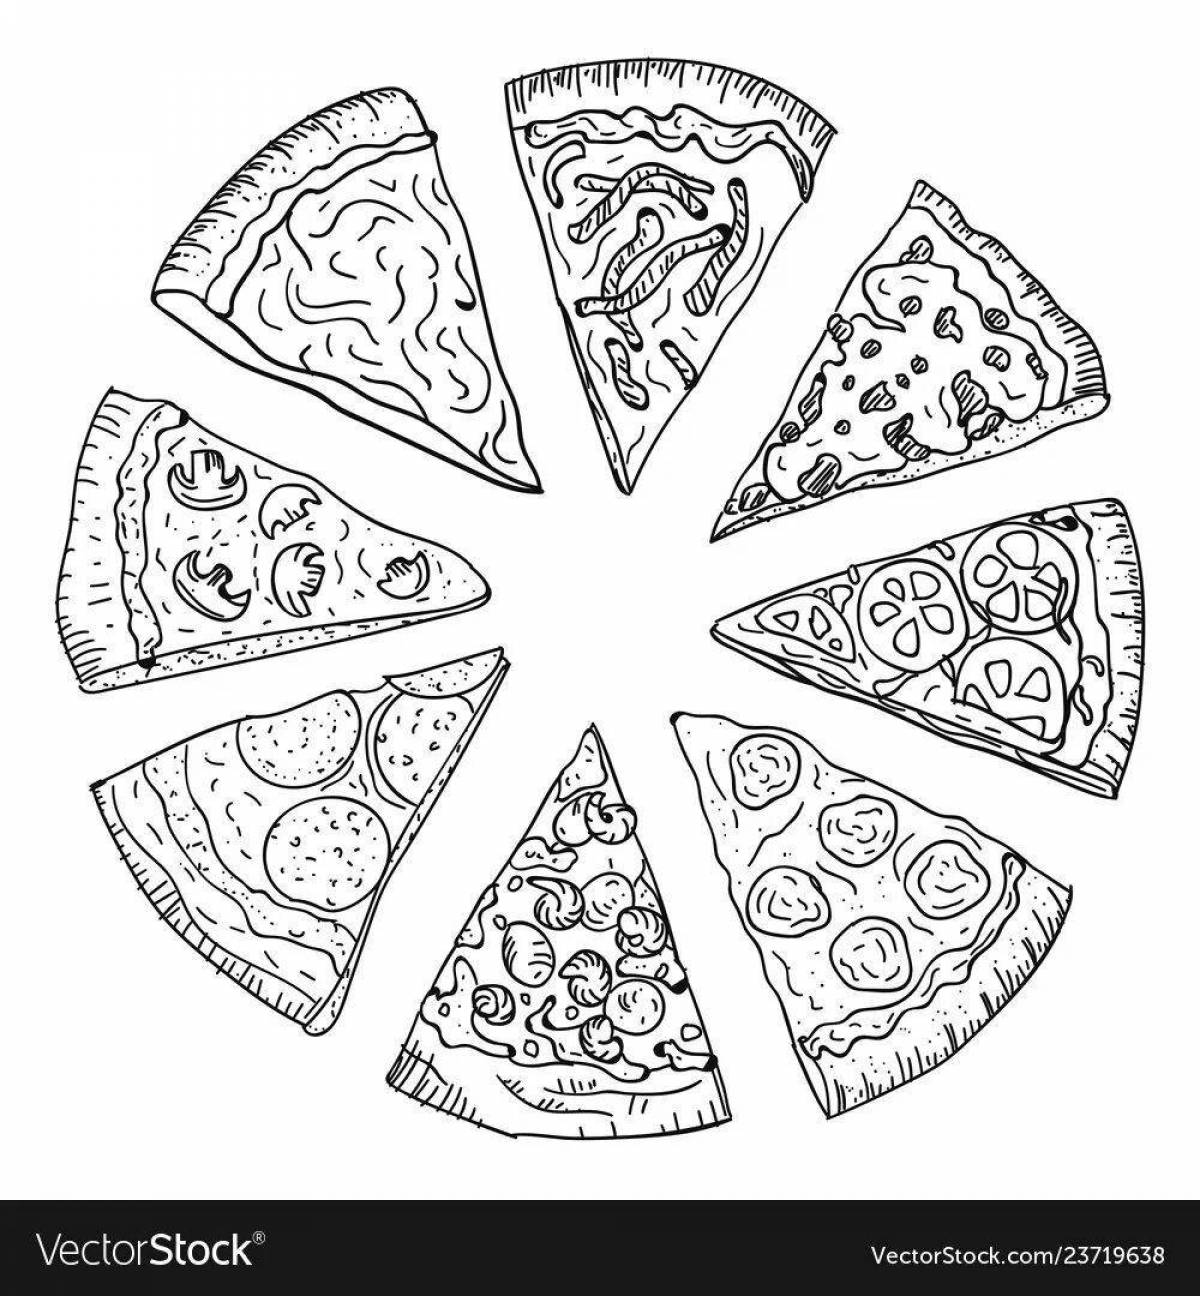 Attractive pizza coloring page